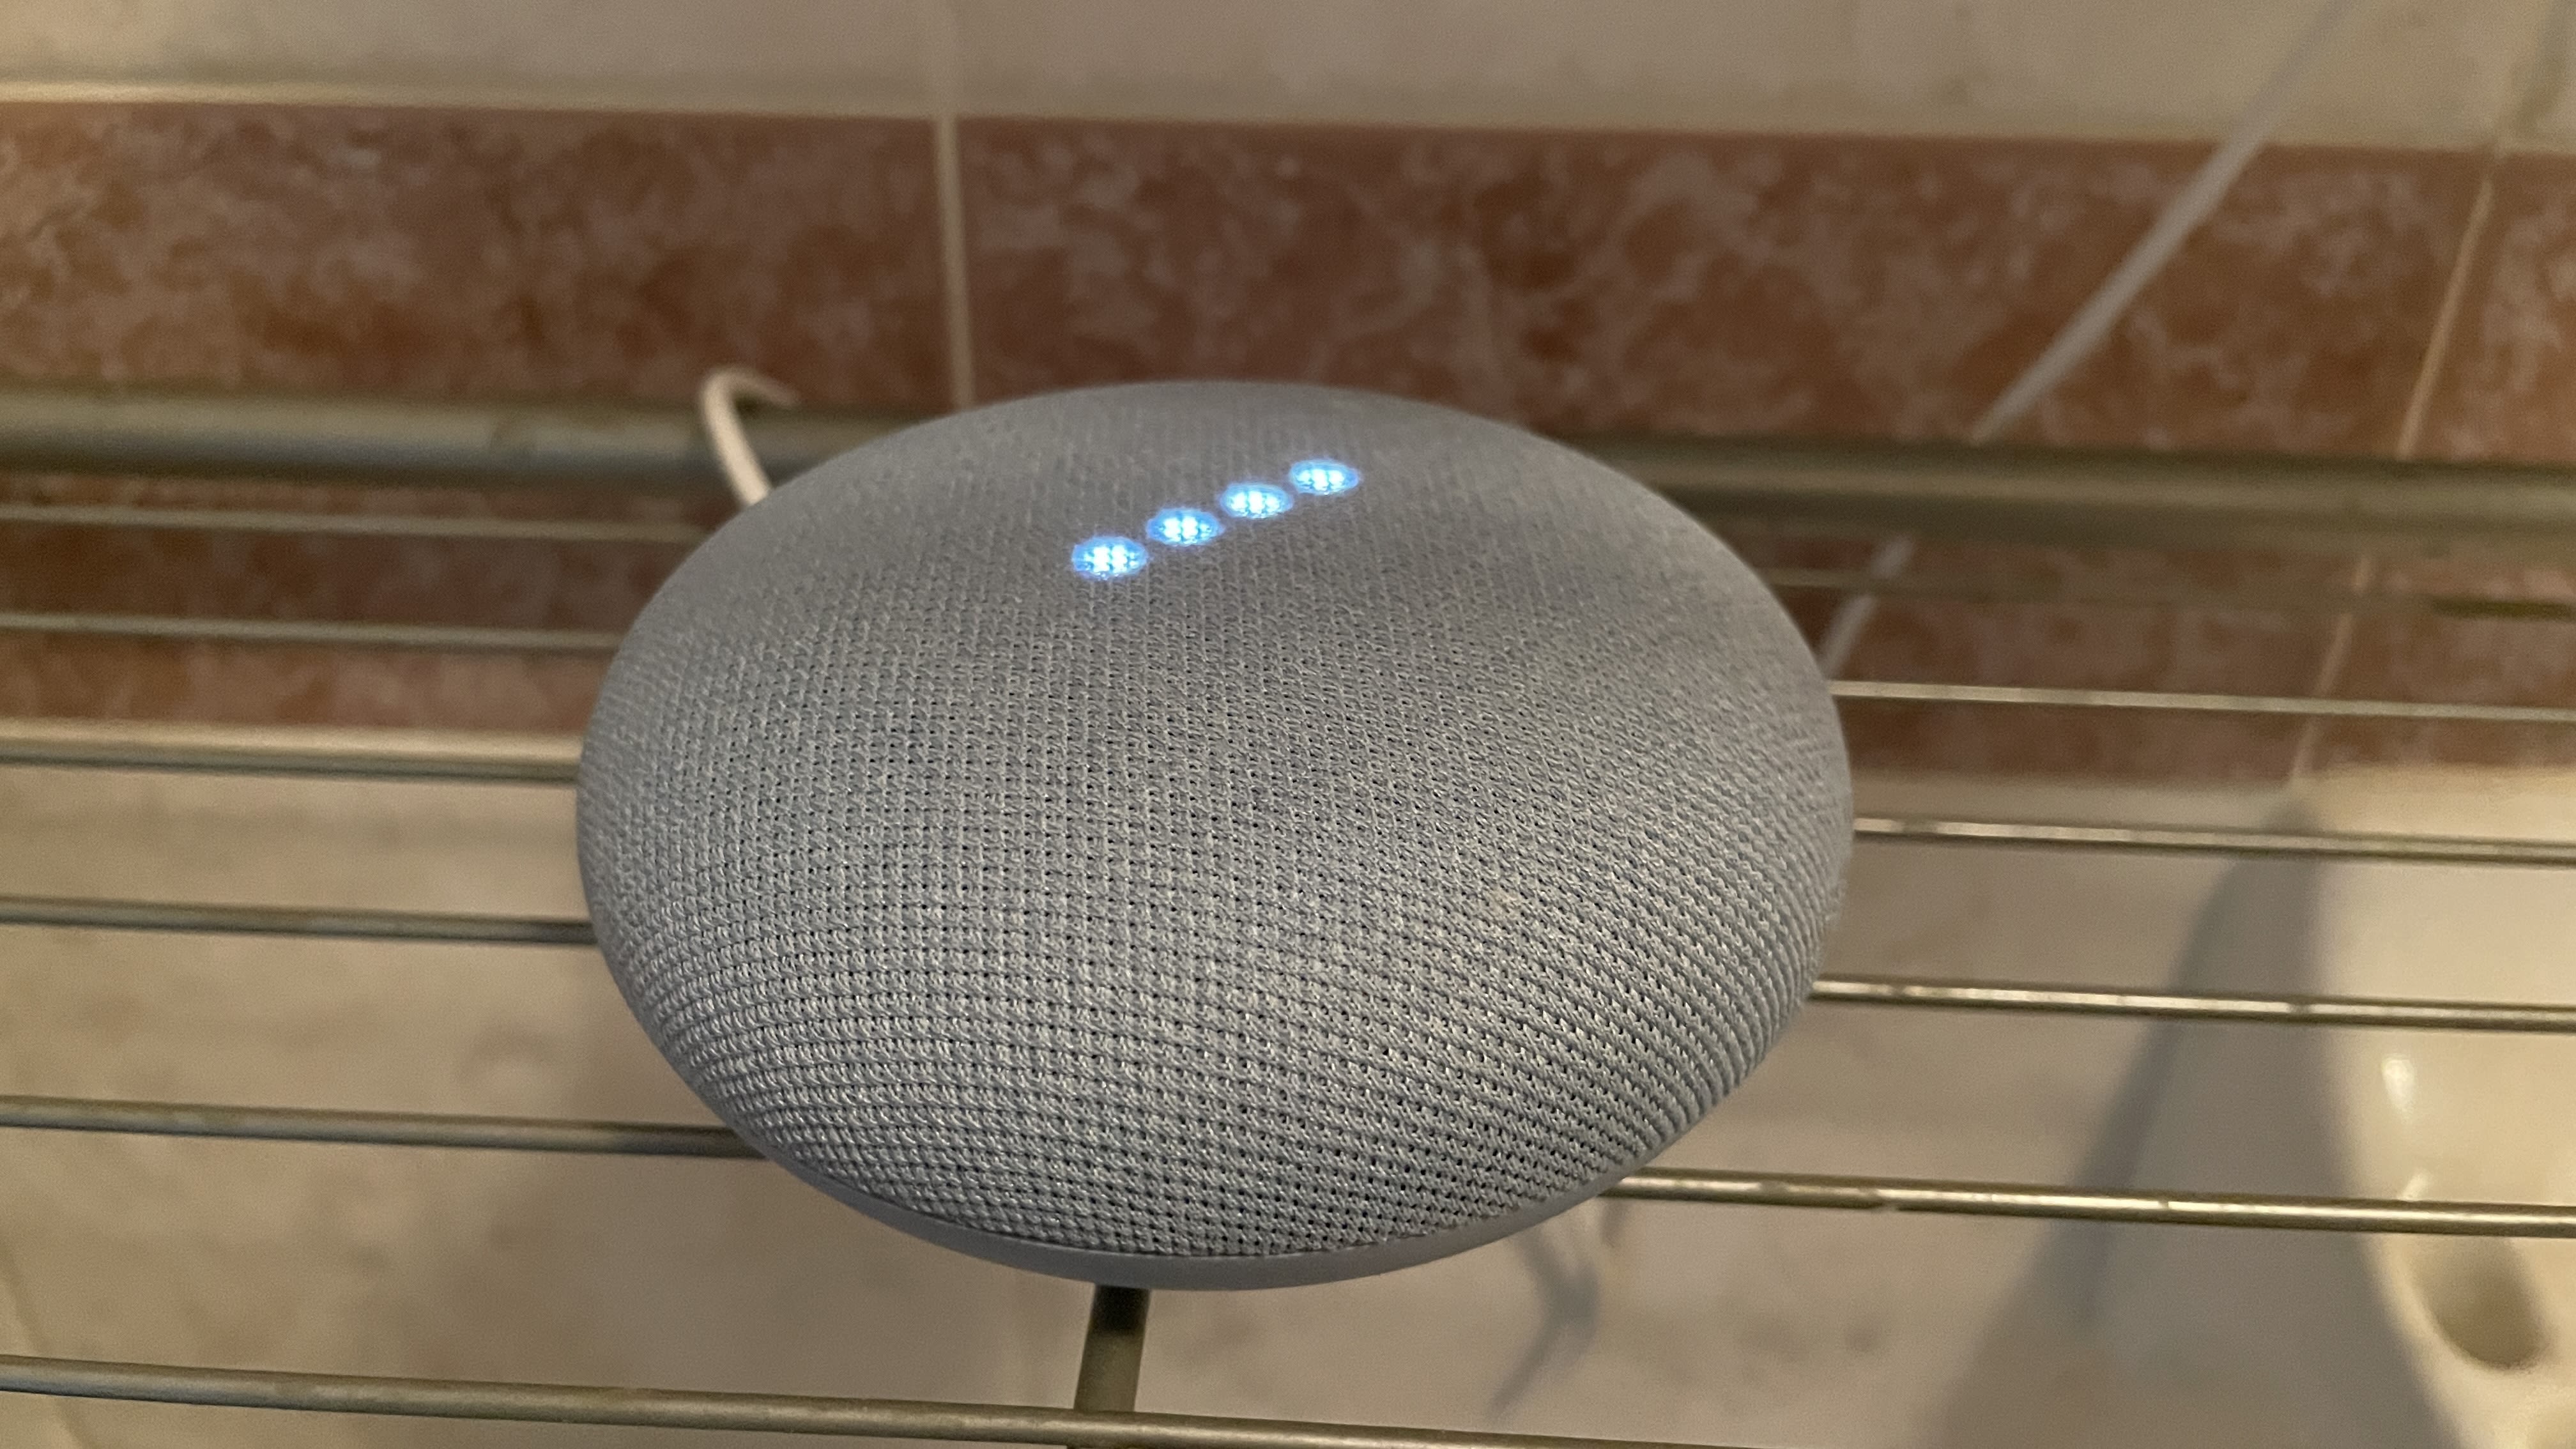 Google's Nest Mini will reportedly succeed the Home Mini